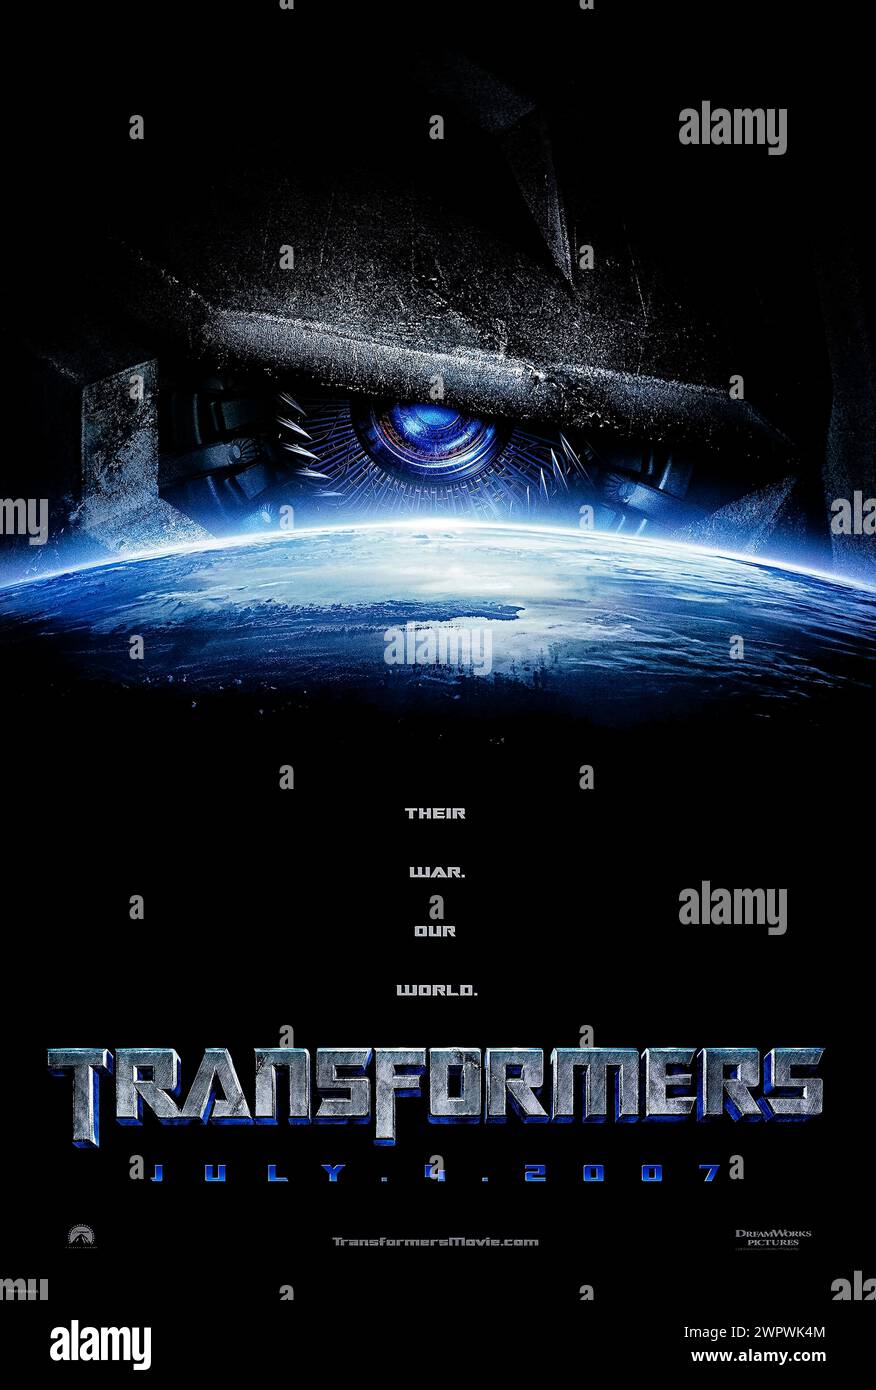 Transformers (2007) directed by Michael Bay and starring Shia LaBeouf, Megan Fox and Josh Duhamel. An ancient struggle between two Cybertronian races, the heroic Autobots and the evil Decepticons, comes to Earth, with a clue to the ultimate power held by a teenager. Photograph of an original 2007 US advance poster. ***EDITORIAL USE ONLY*** Credit: BFA / Paramount Pictures Stock Photo